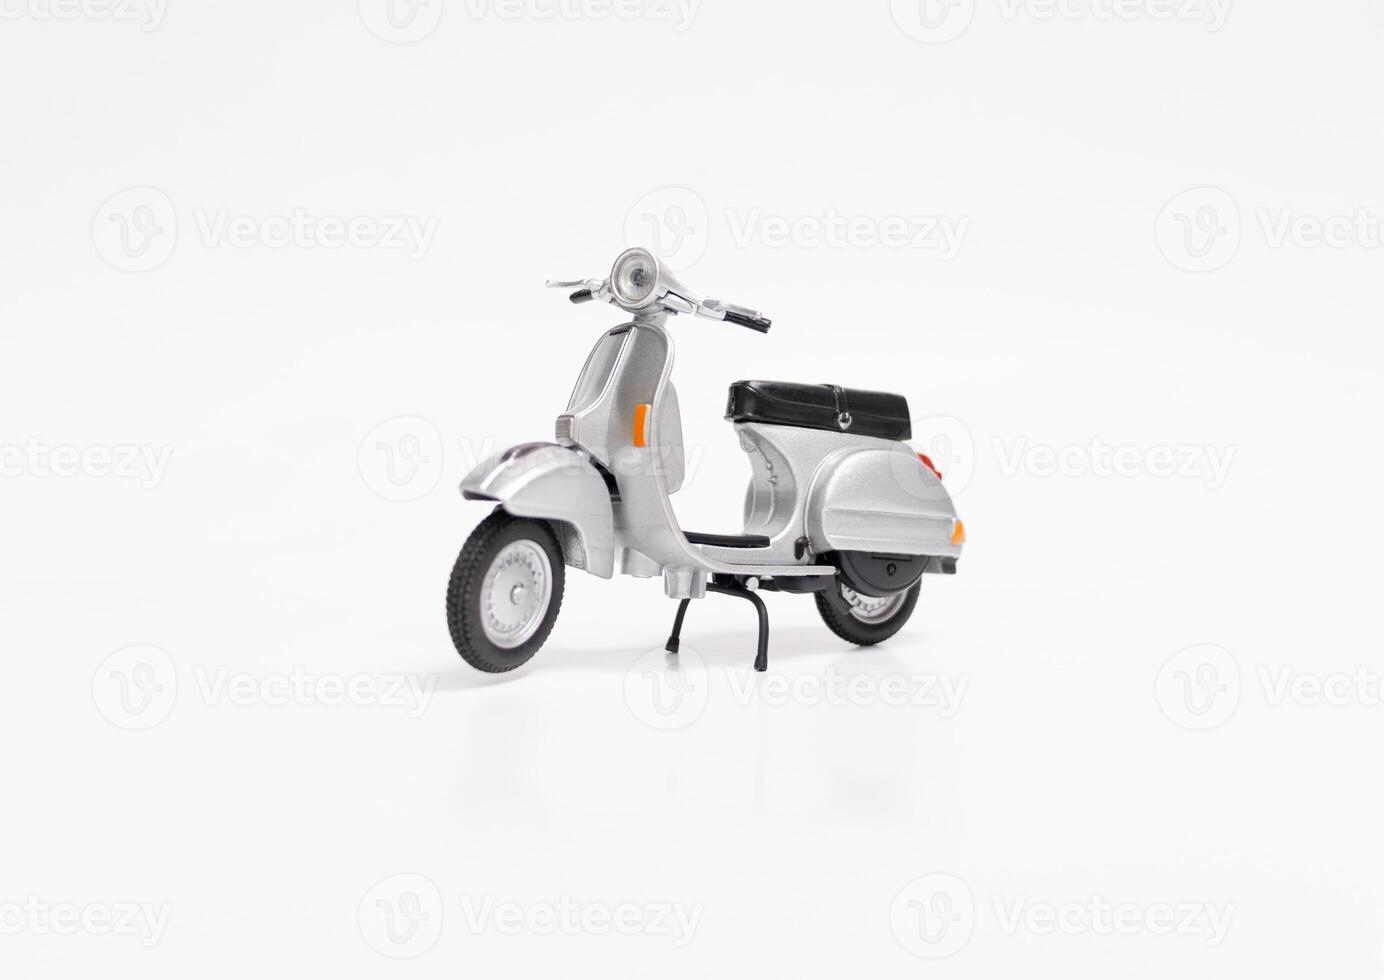 Miniature classic scooter on white background. After some edits. photo